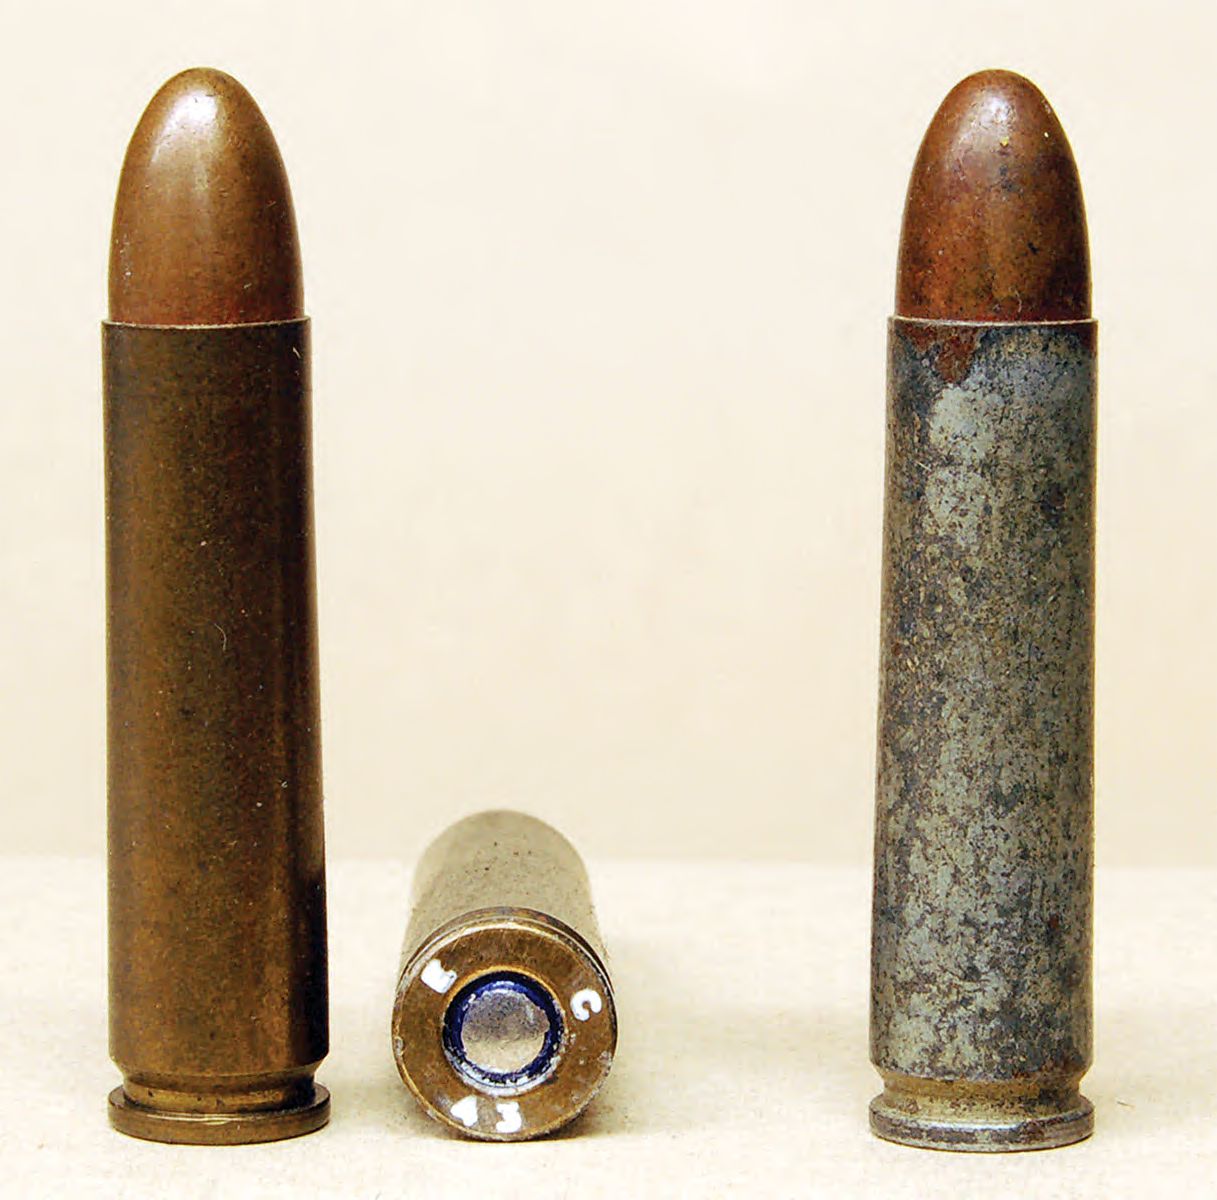 An Evansville brass-cased .30 Carbine headstamped E C 43 and a steel-cased round with the same headstamp. EC made about 500 million .30 Carbine rounds in both brass and steel.